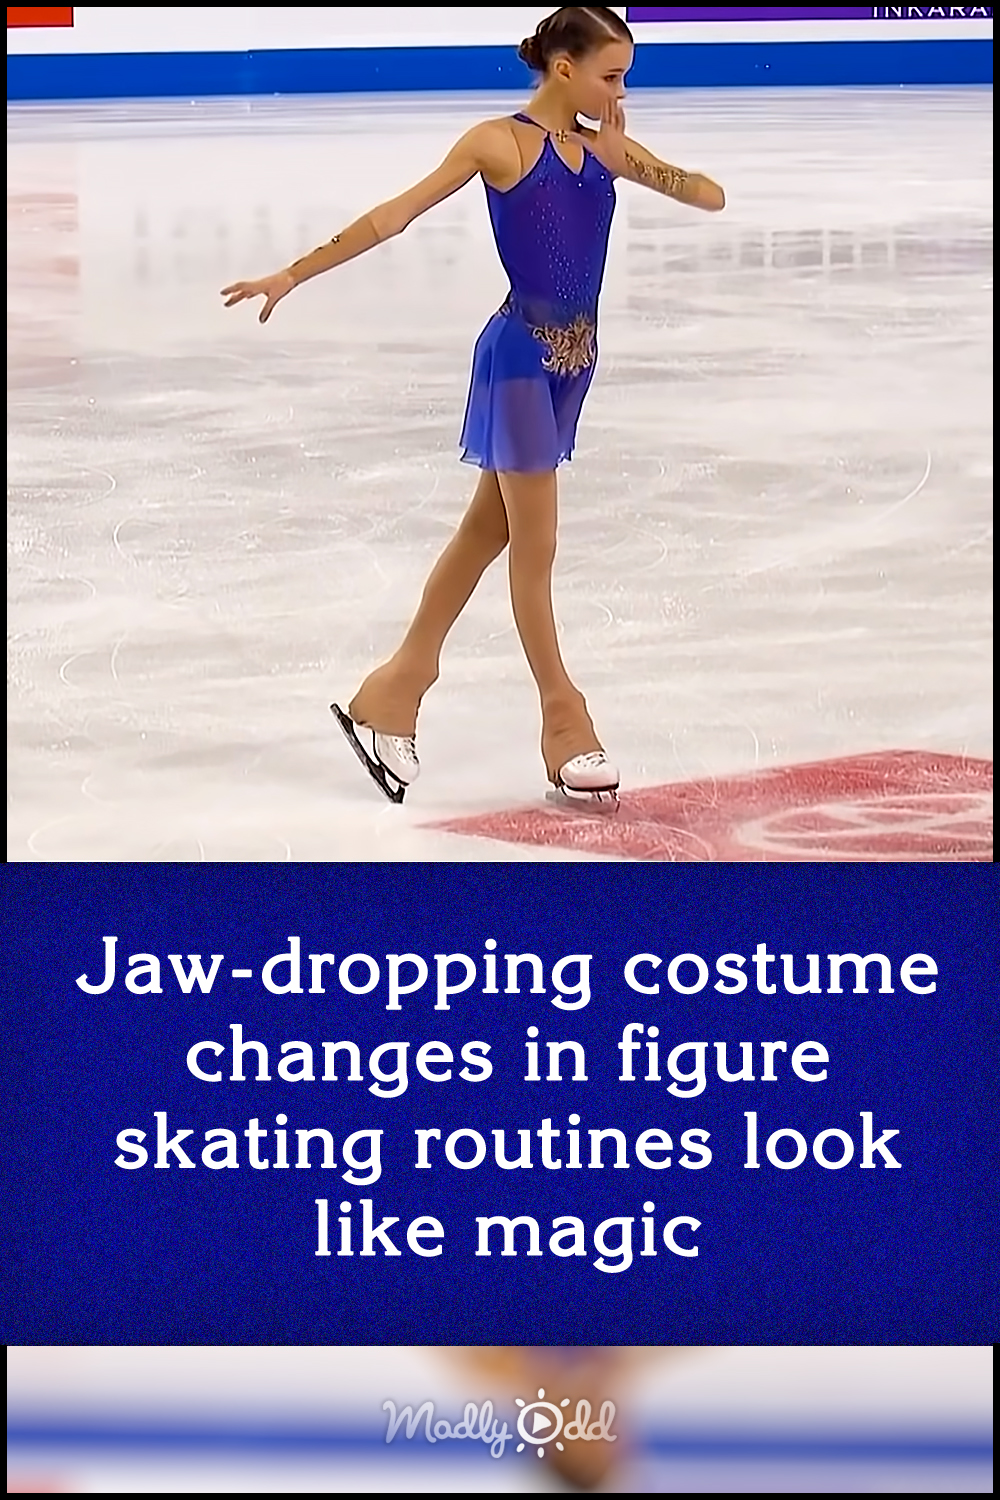 Jaw-dropping costume changes in figure skating routines look like magic